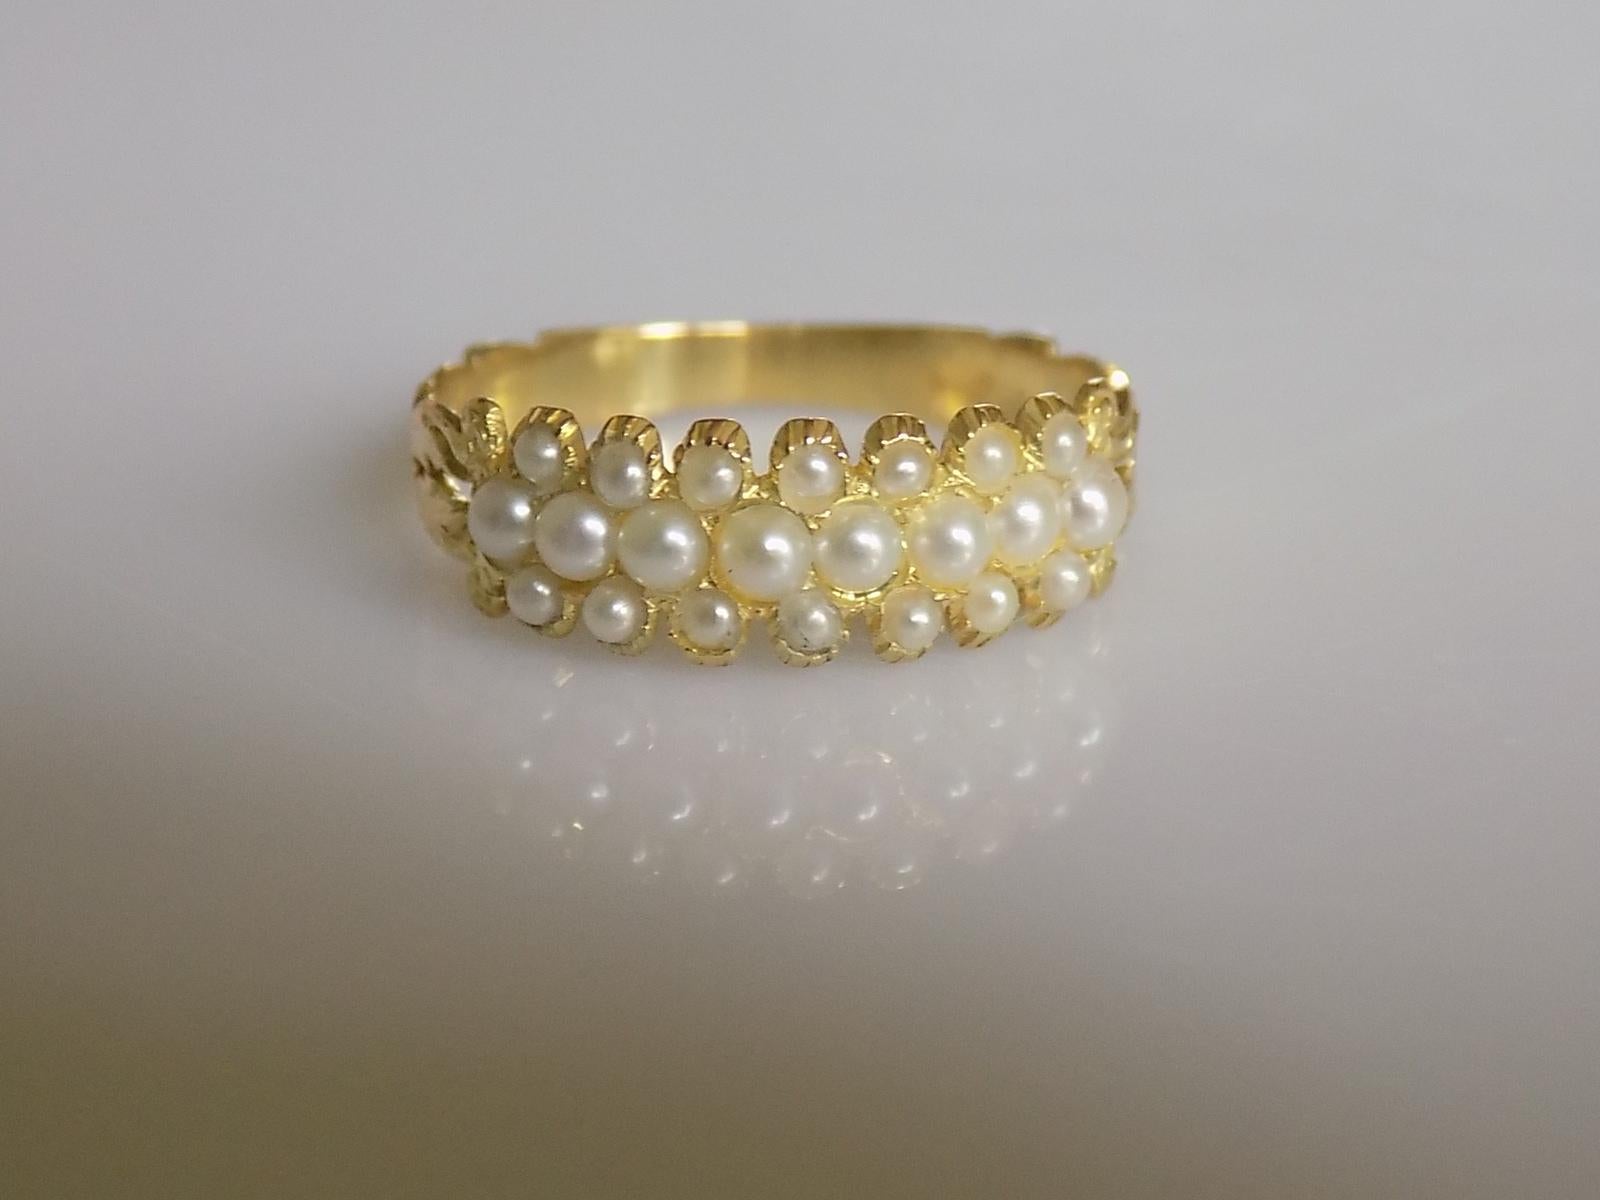 A Georgian c.1800s 15 Carat Yellow Gold and split Pearl half eternity ring. English origin.
Size M 1/2 UK, 6.75 US.
Height of the face 6mm.
Weight 2.0gr.
Unmarked, tested 15 Carat Gold.
Overall very good condition, fully complete with pearls and